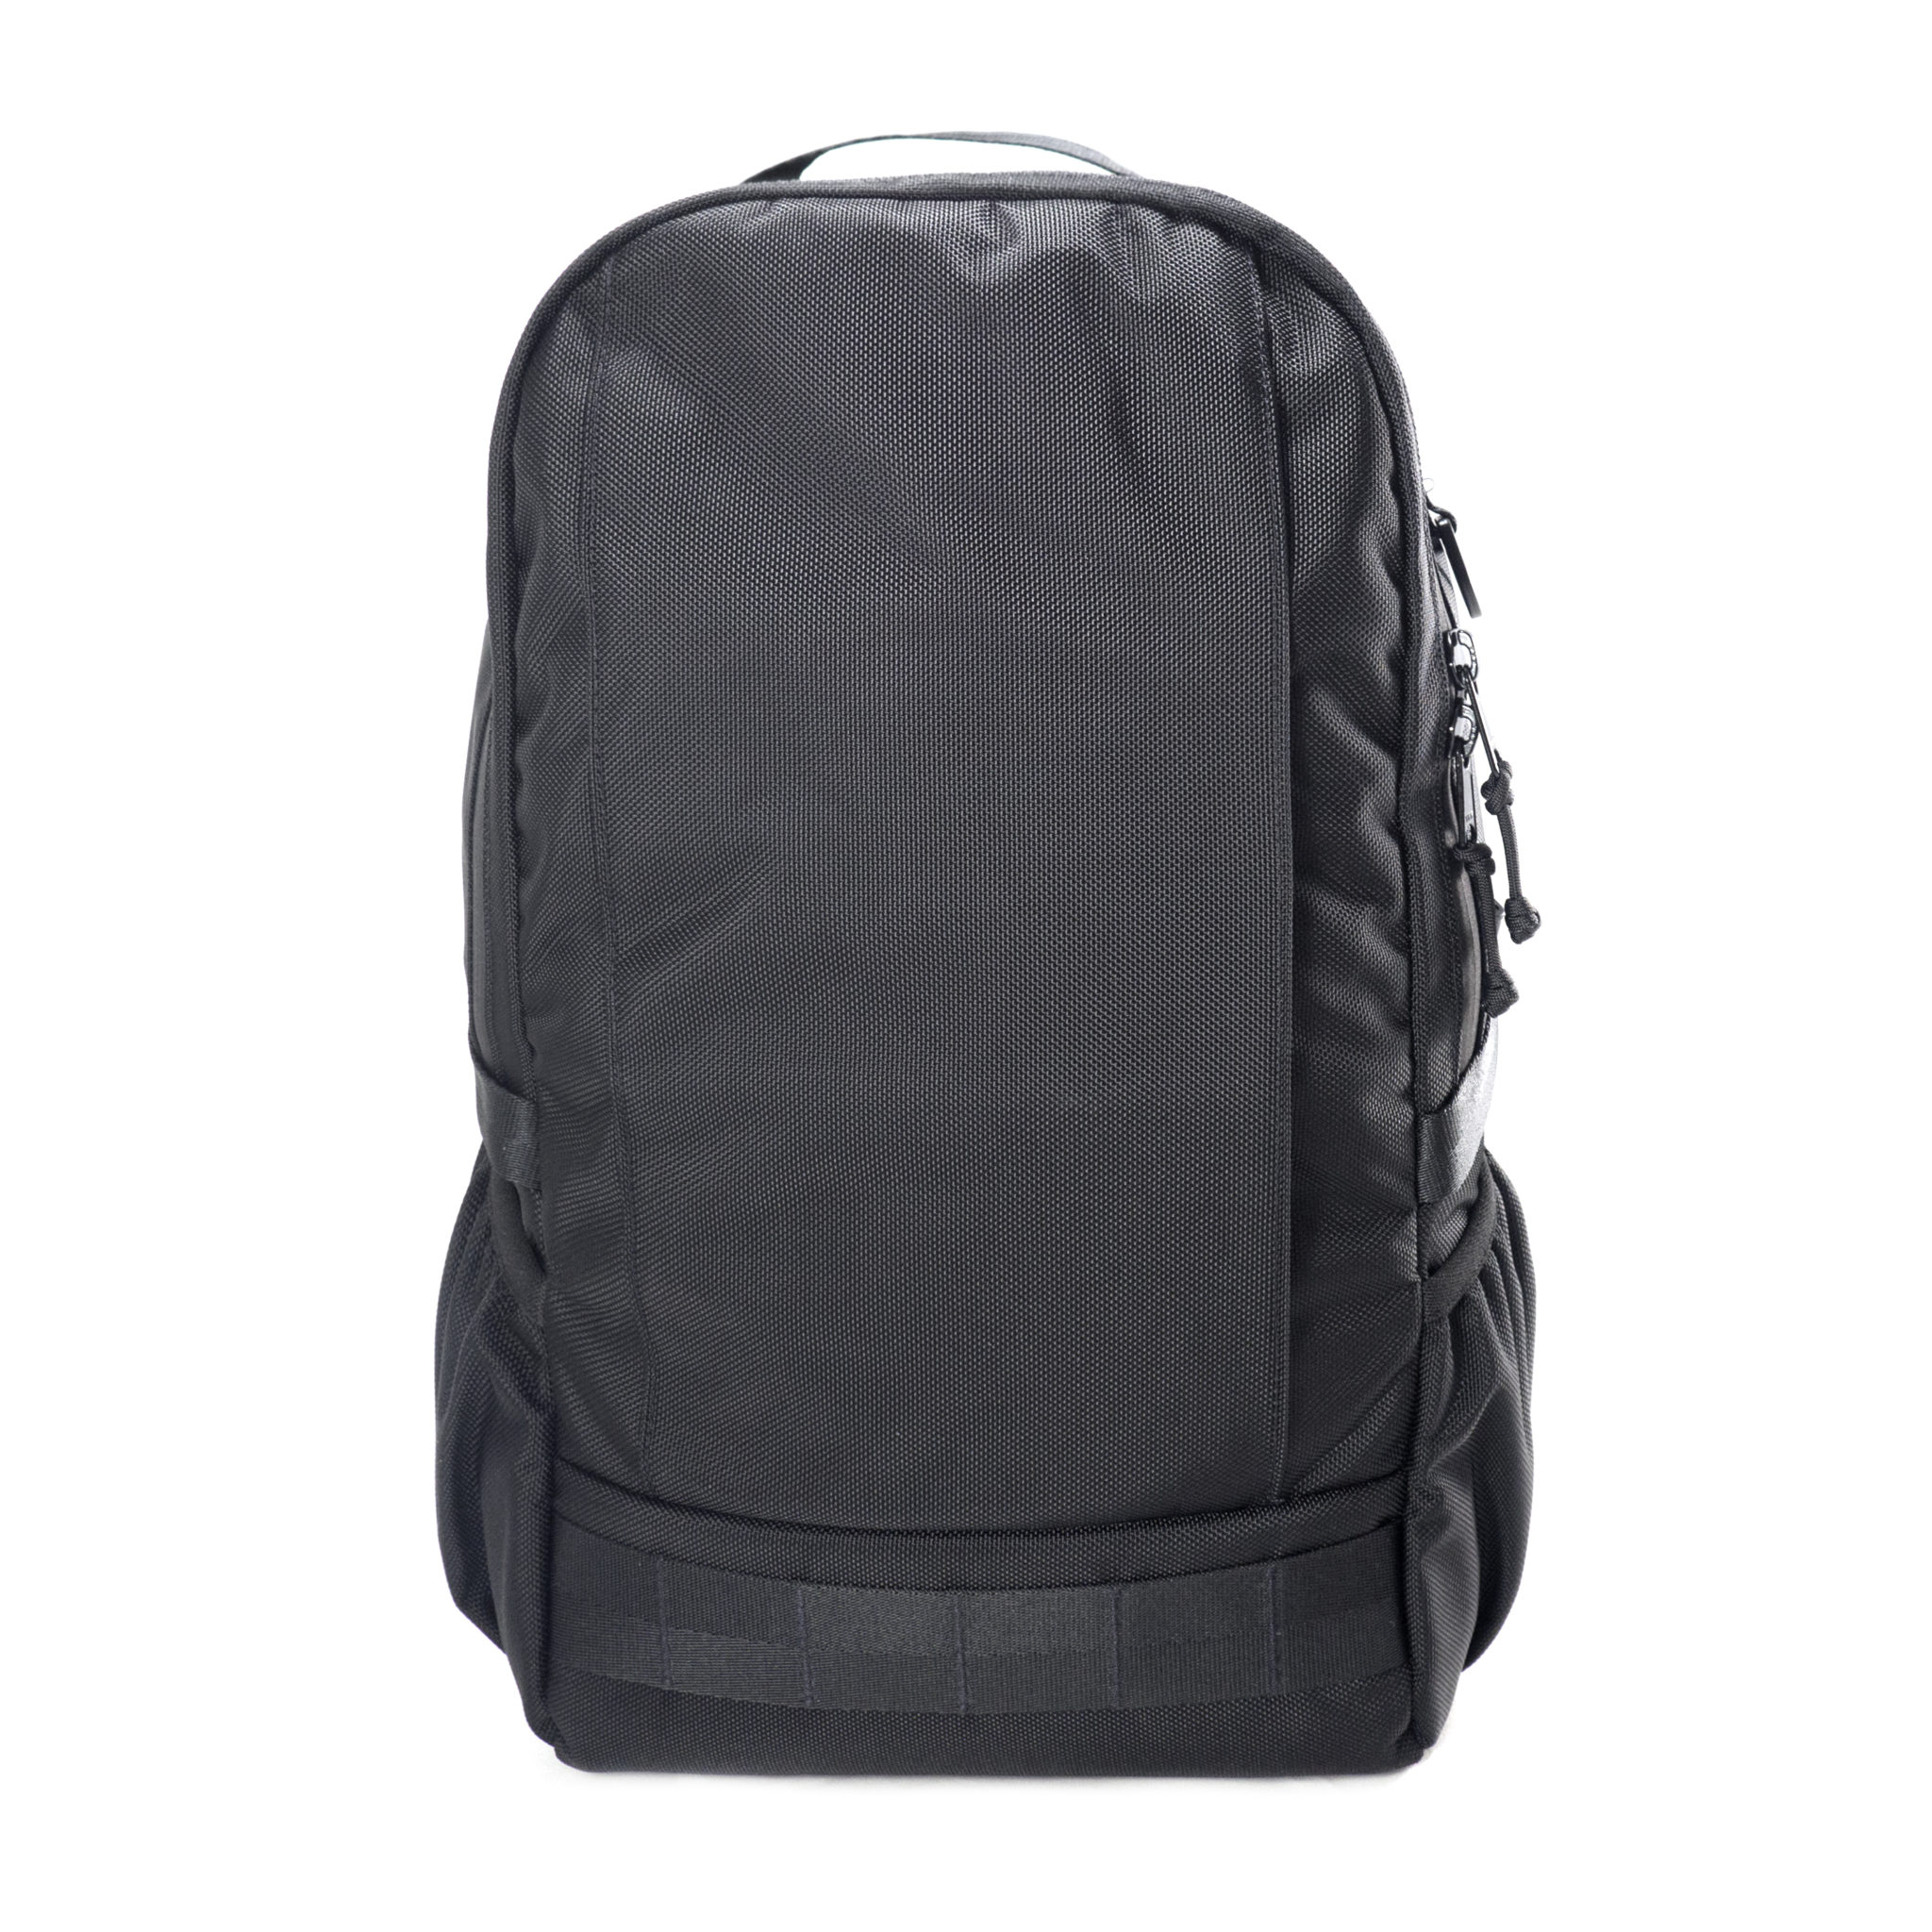 ARKTYPE Update Their Line With the 22L Jetpack - CARRY BETTER